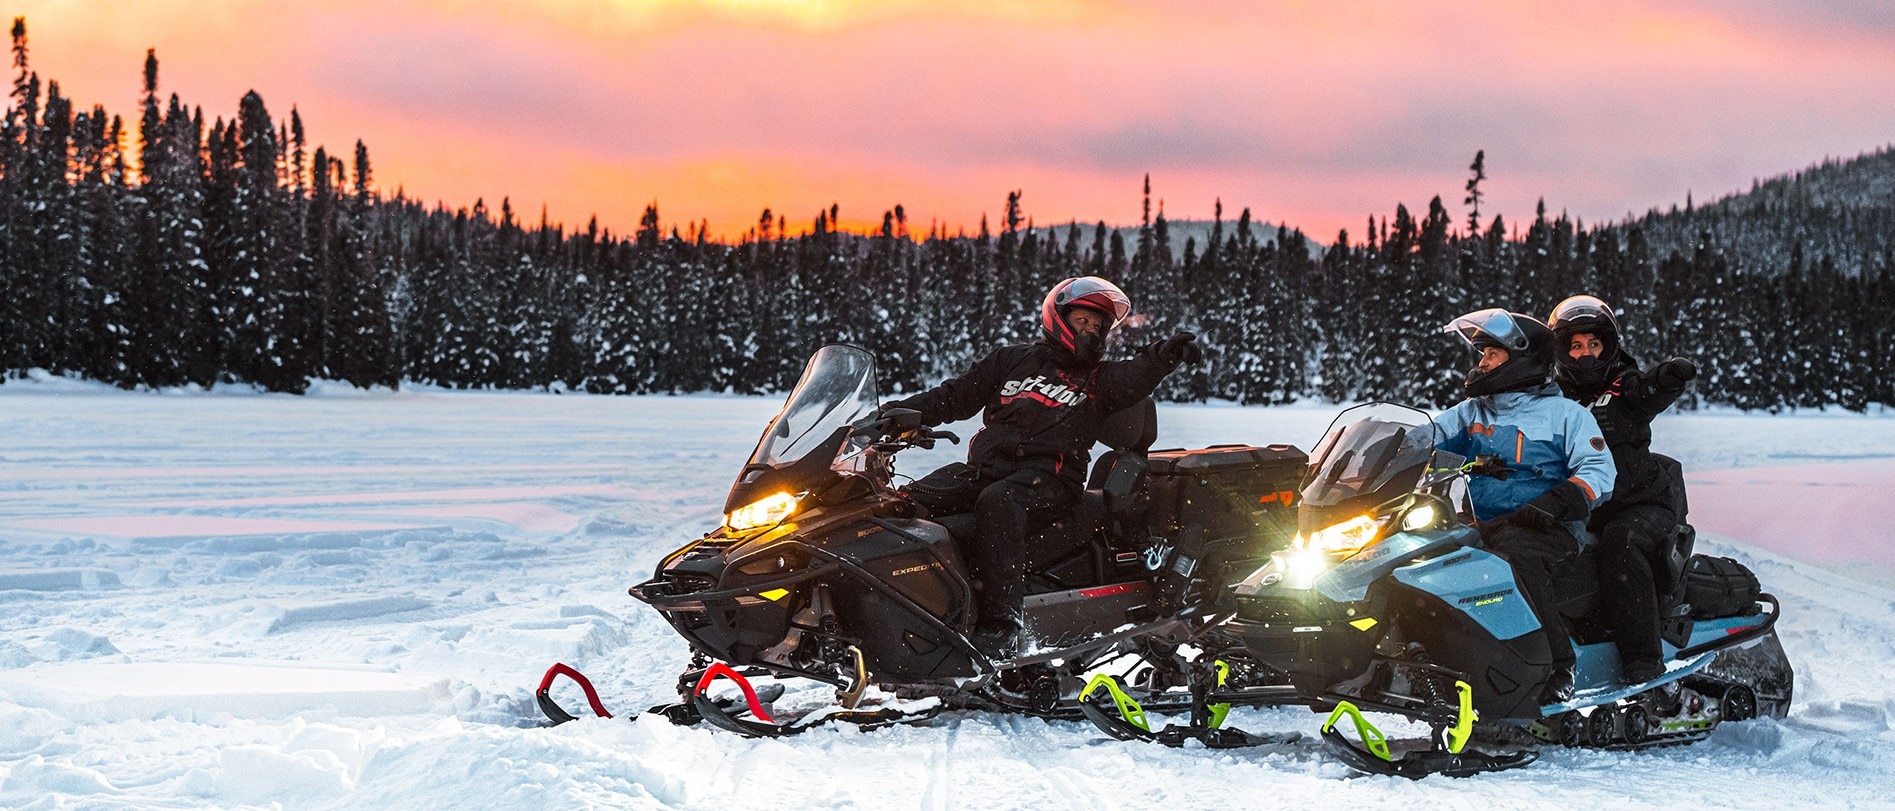 Riders exchanging words on their Ski-Doo